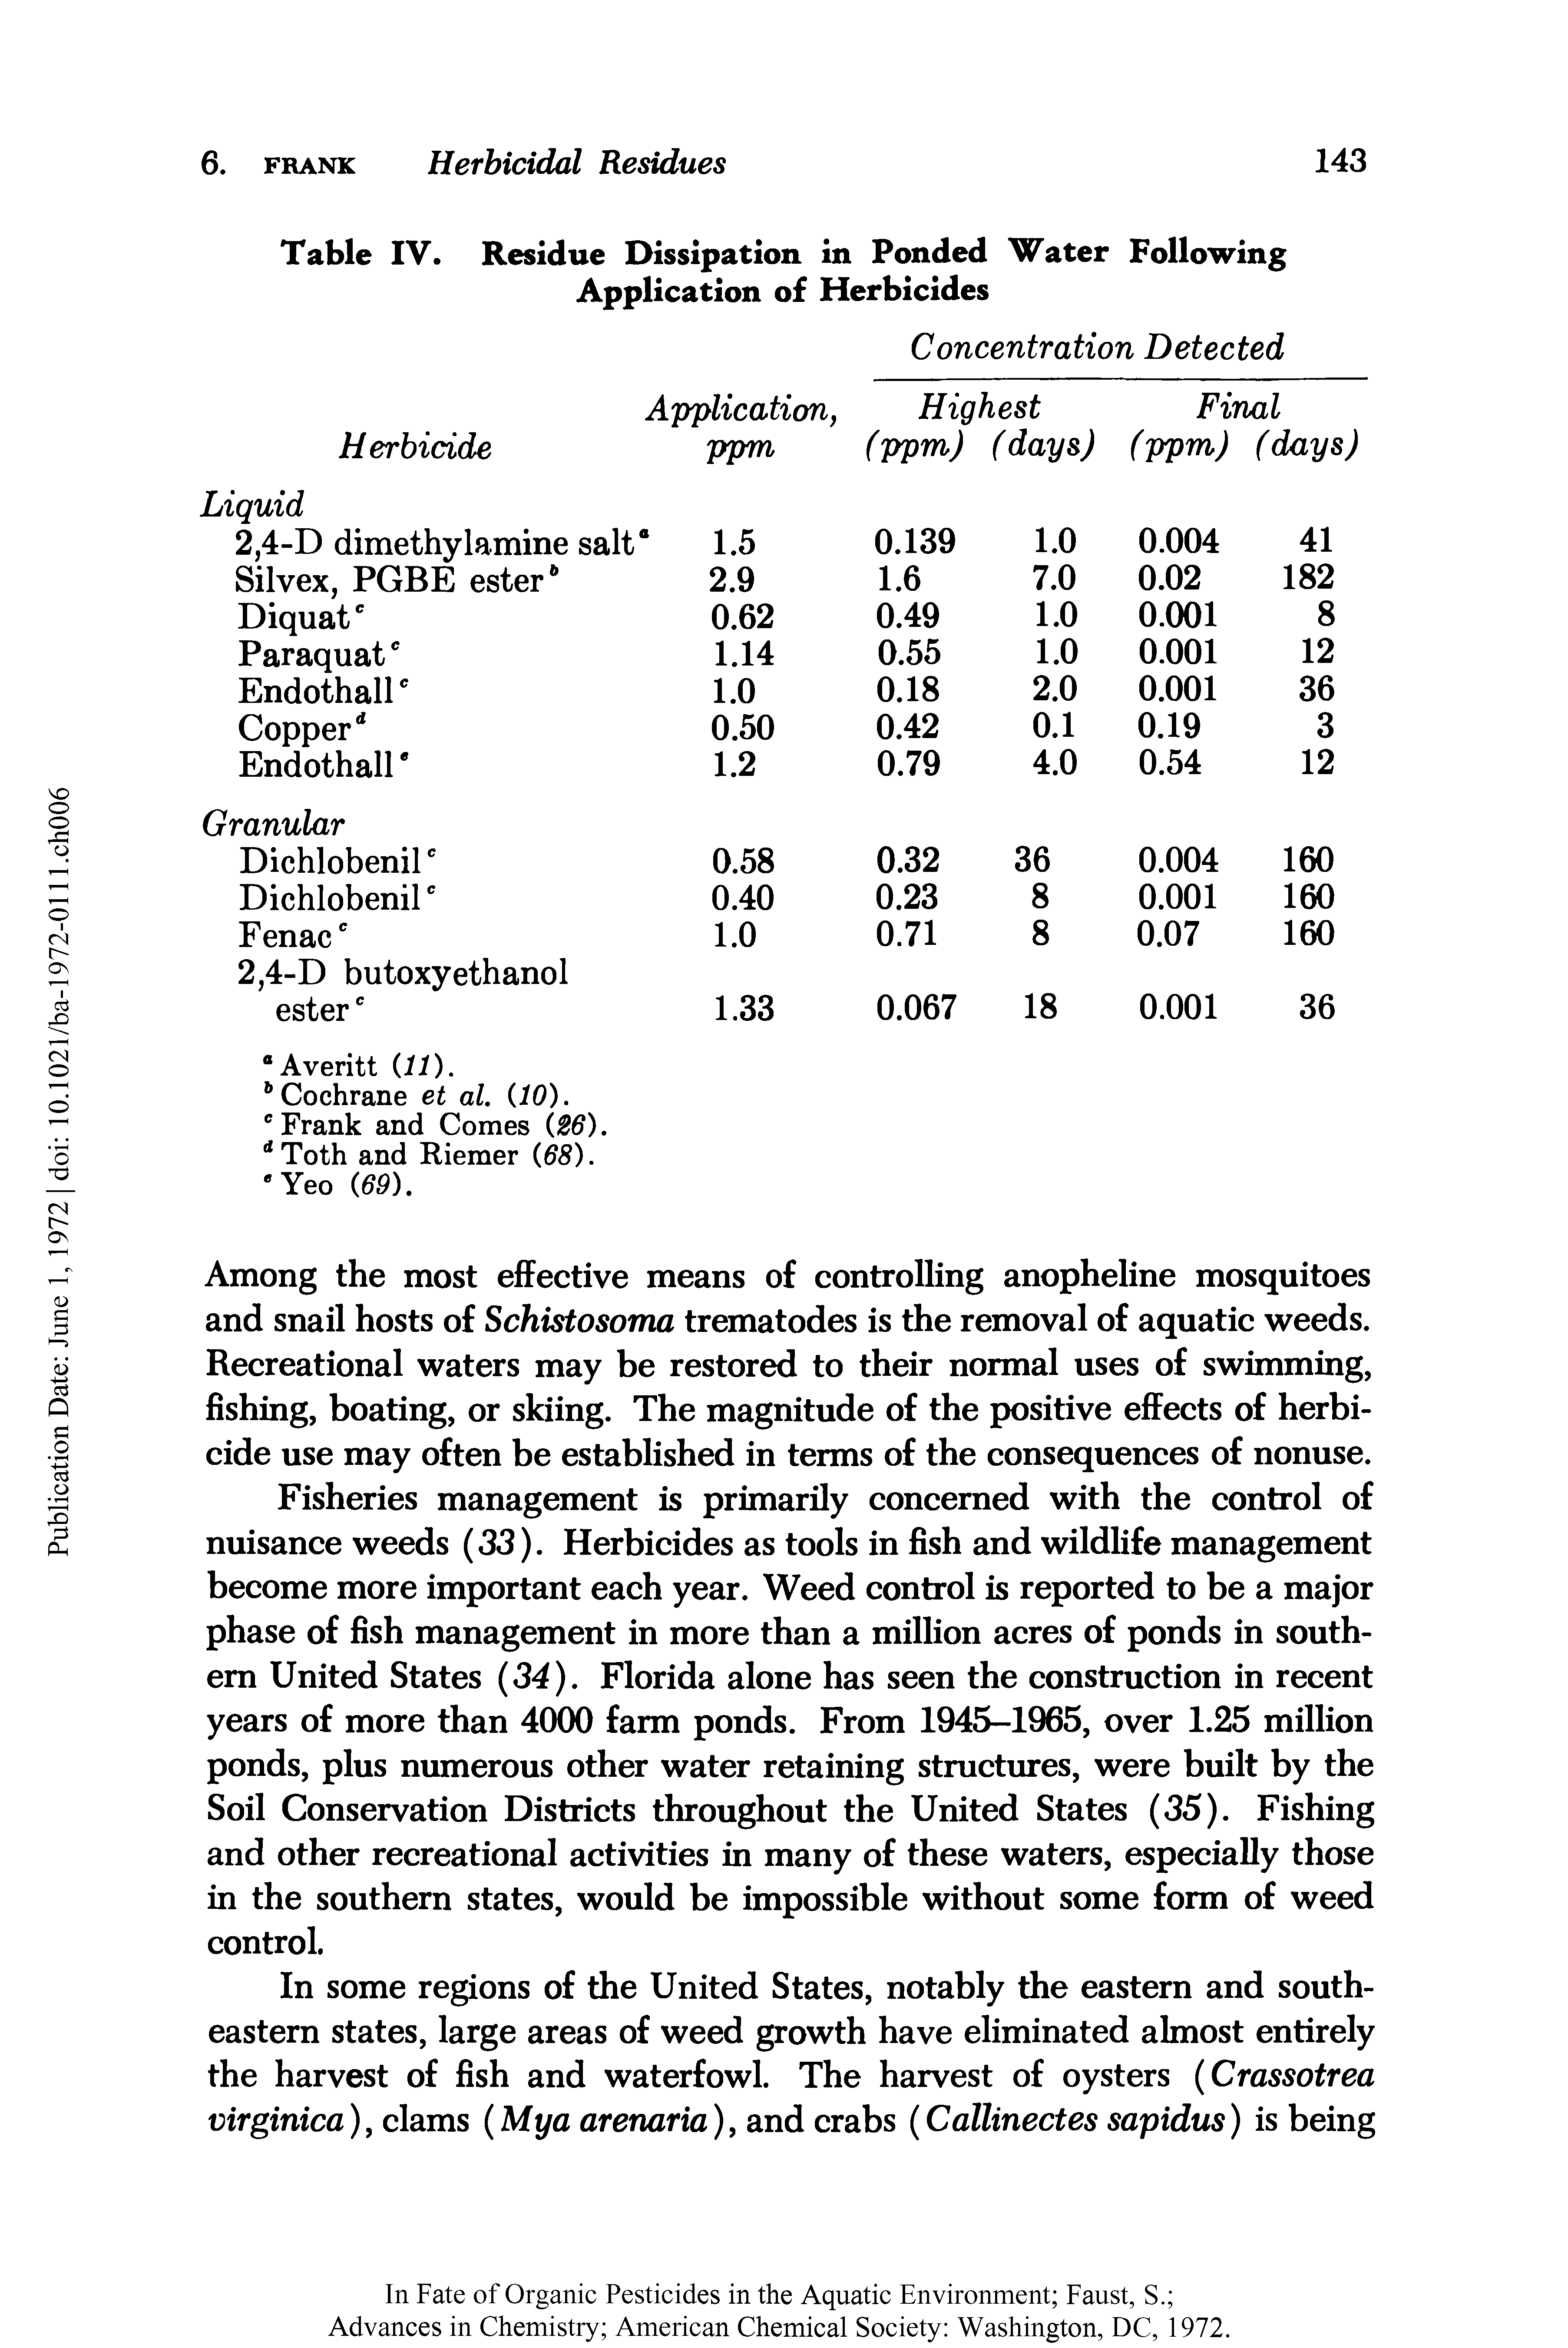 Table IV. Residue Dissipation in Ponded Water Following Application of Herbicides...